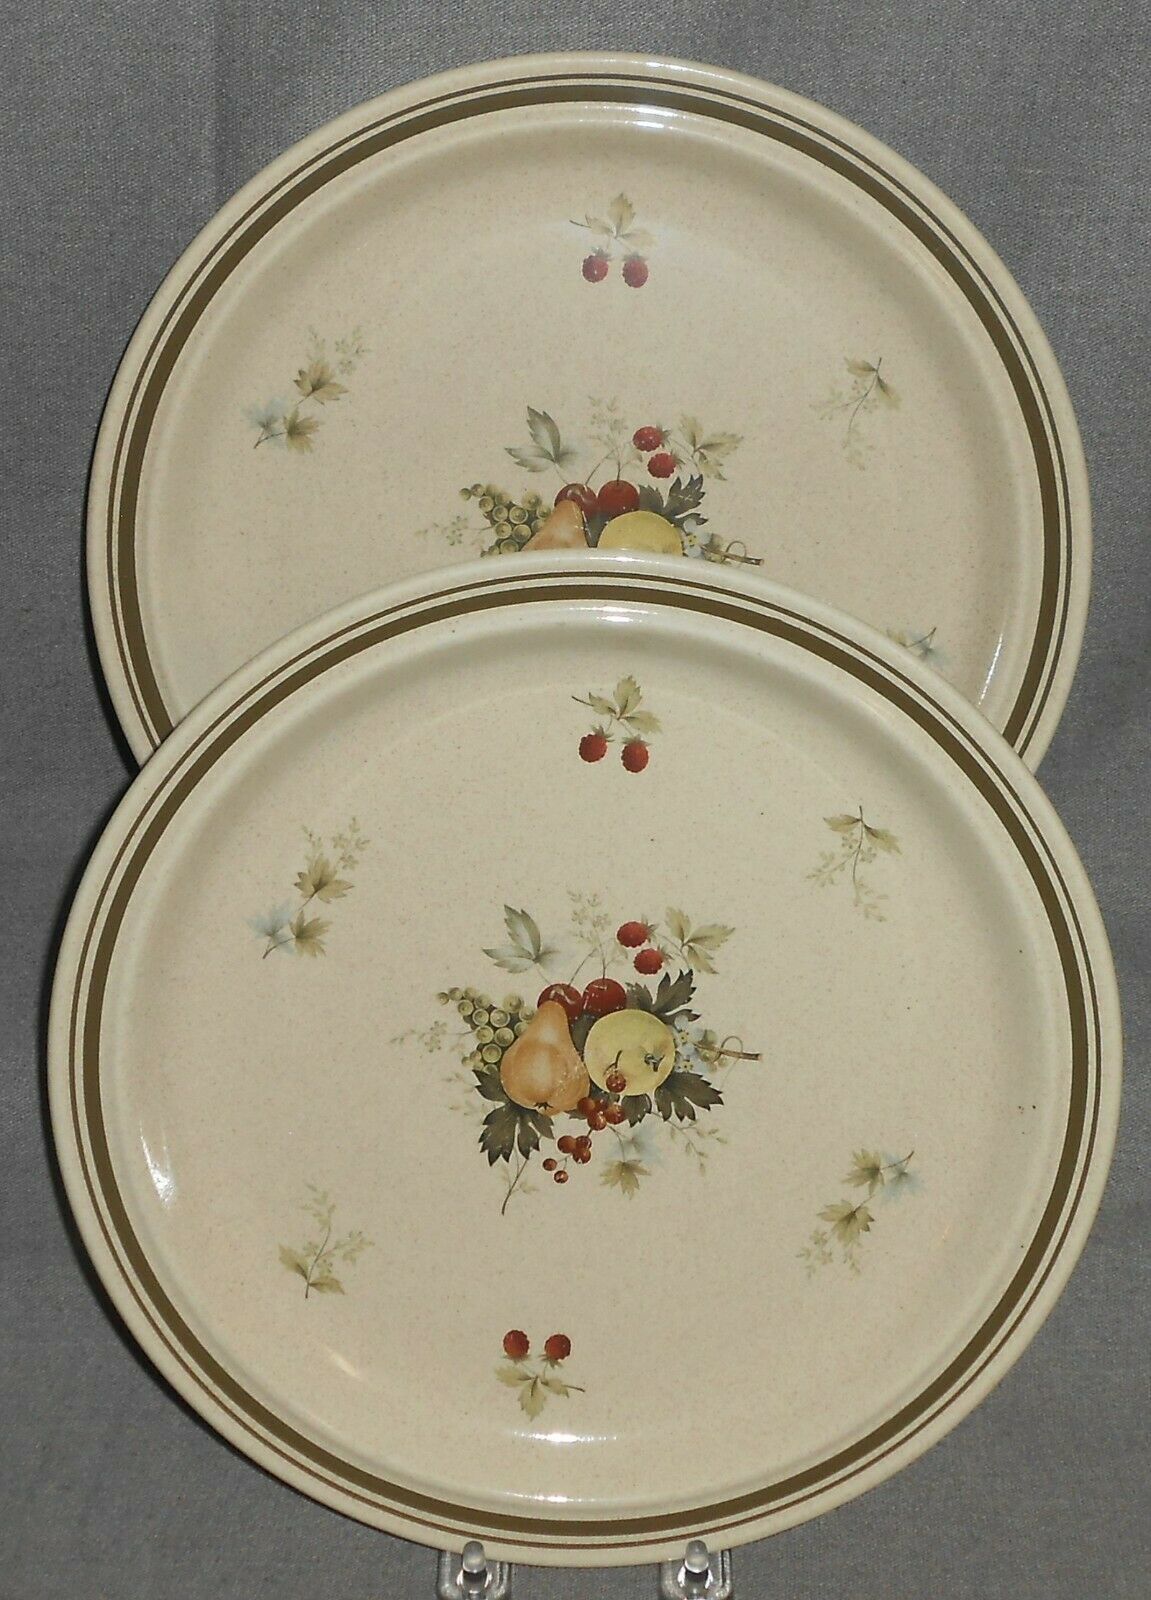 Primary image for 1970s-80s Set (2) Royal Doulton CORNWALL PATTERN Dinner Plates MADE IN ENGLAND